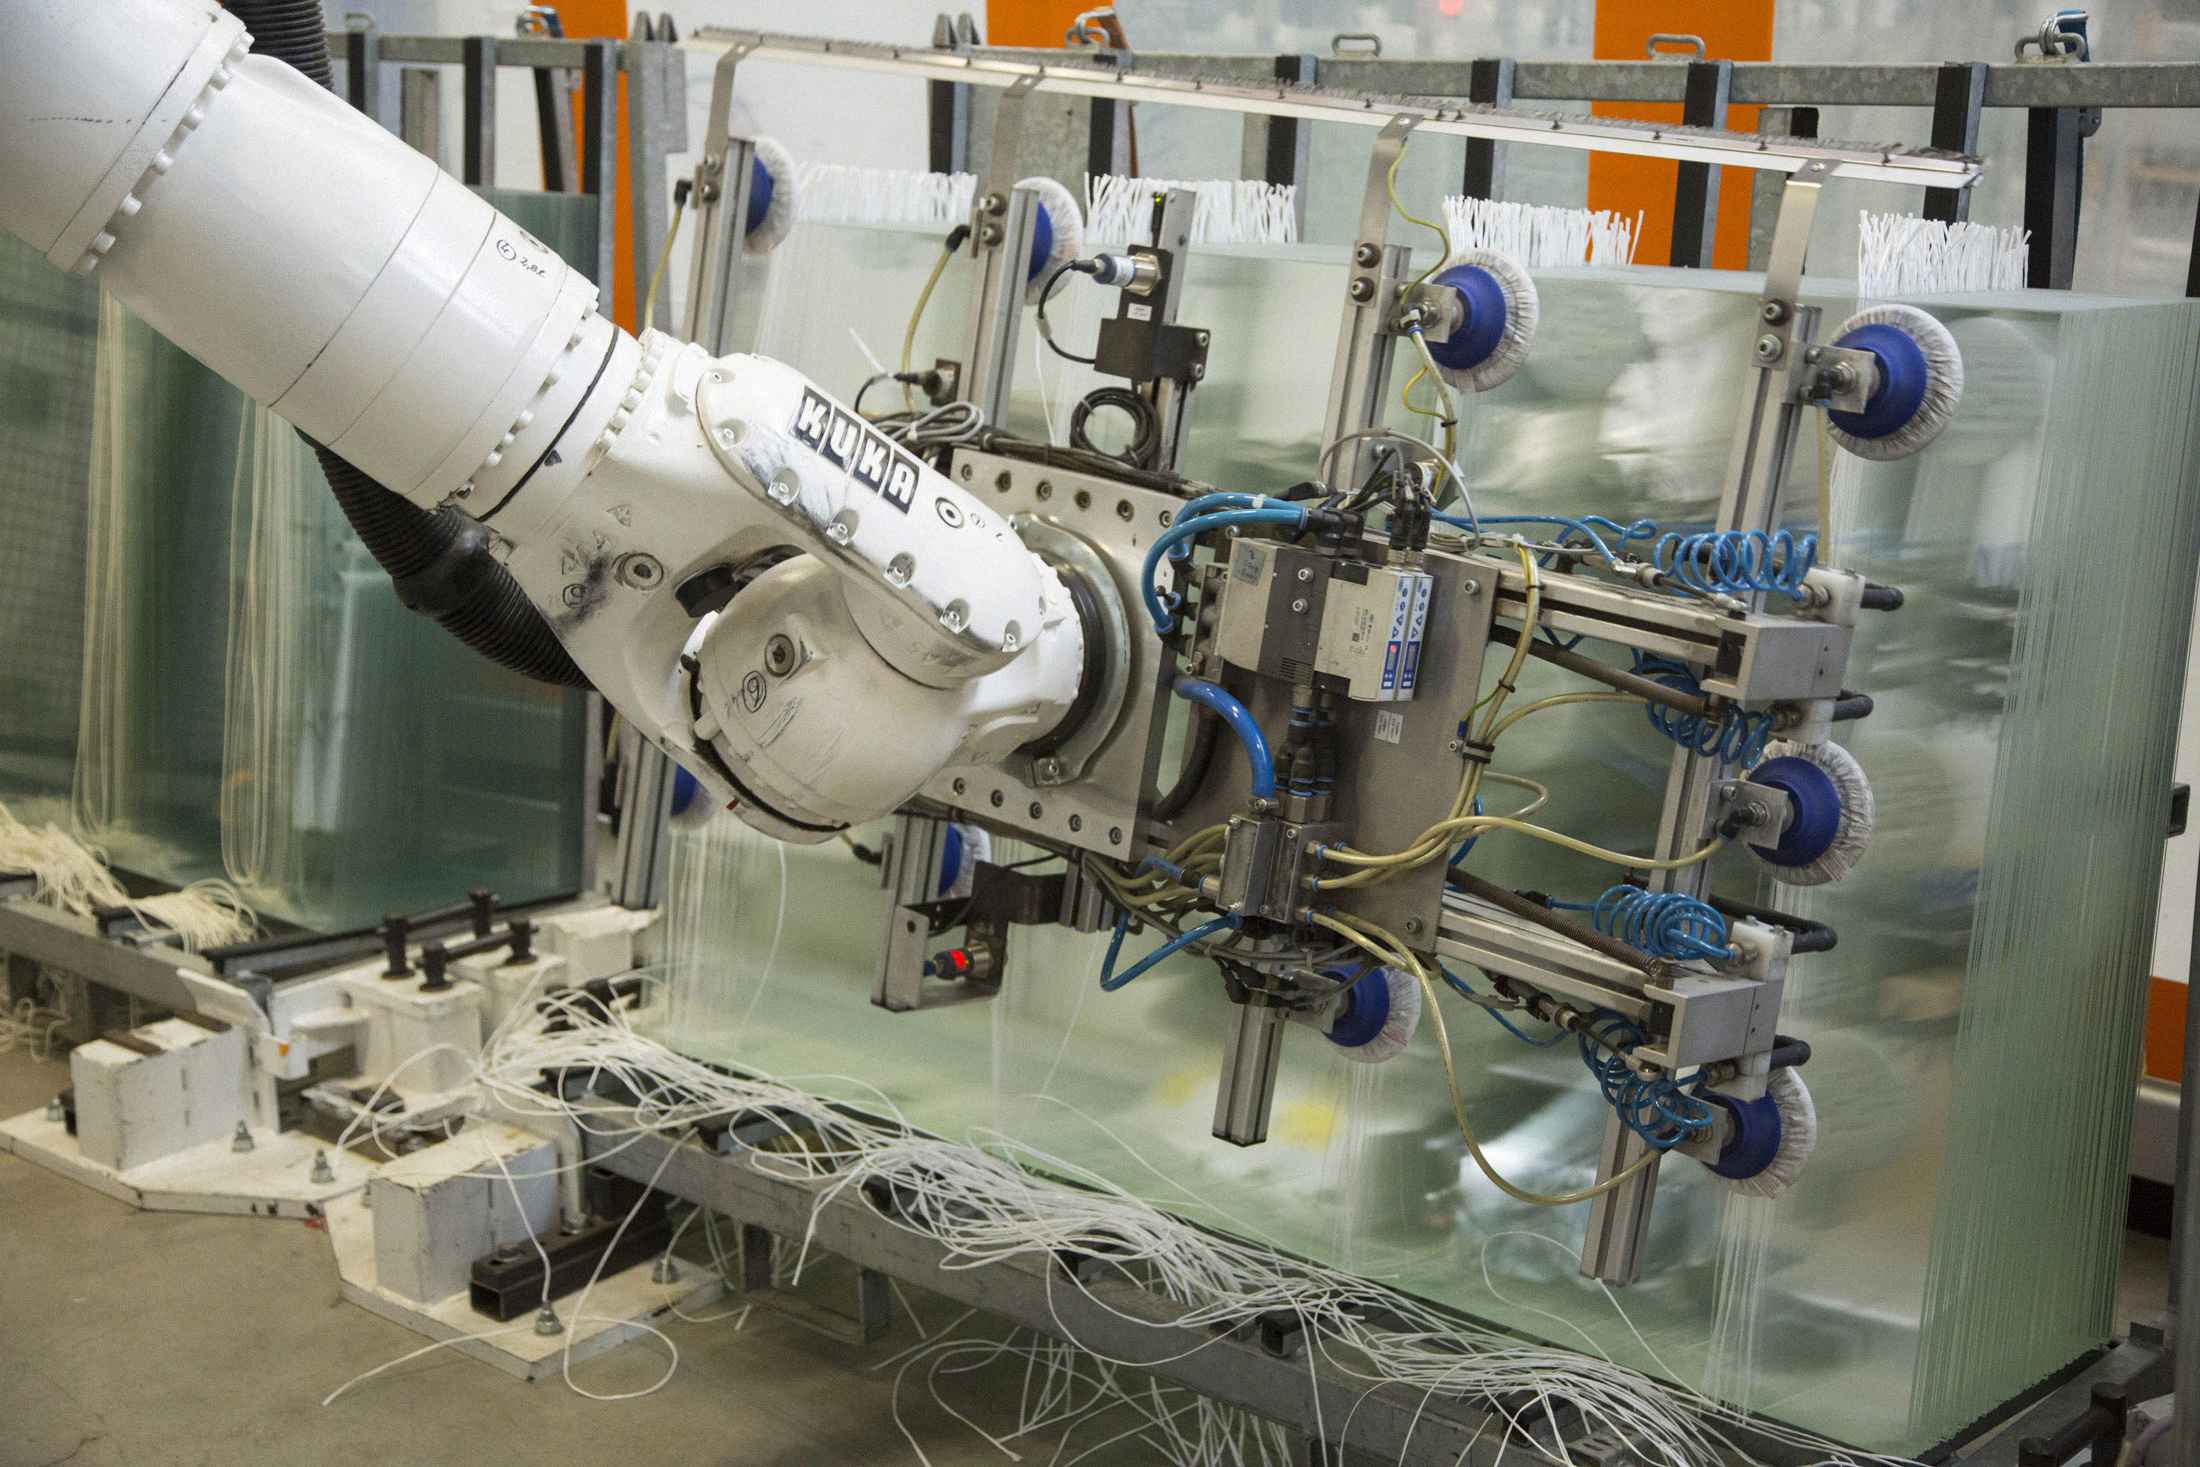 A robotic arm&nbsp;transports sheets of glass during the manufacturing of photovoltaic cells at SolarWorld AG in Freiberg, Germany.
